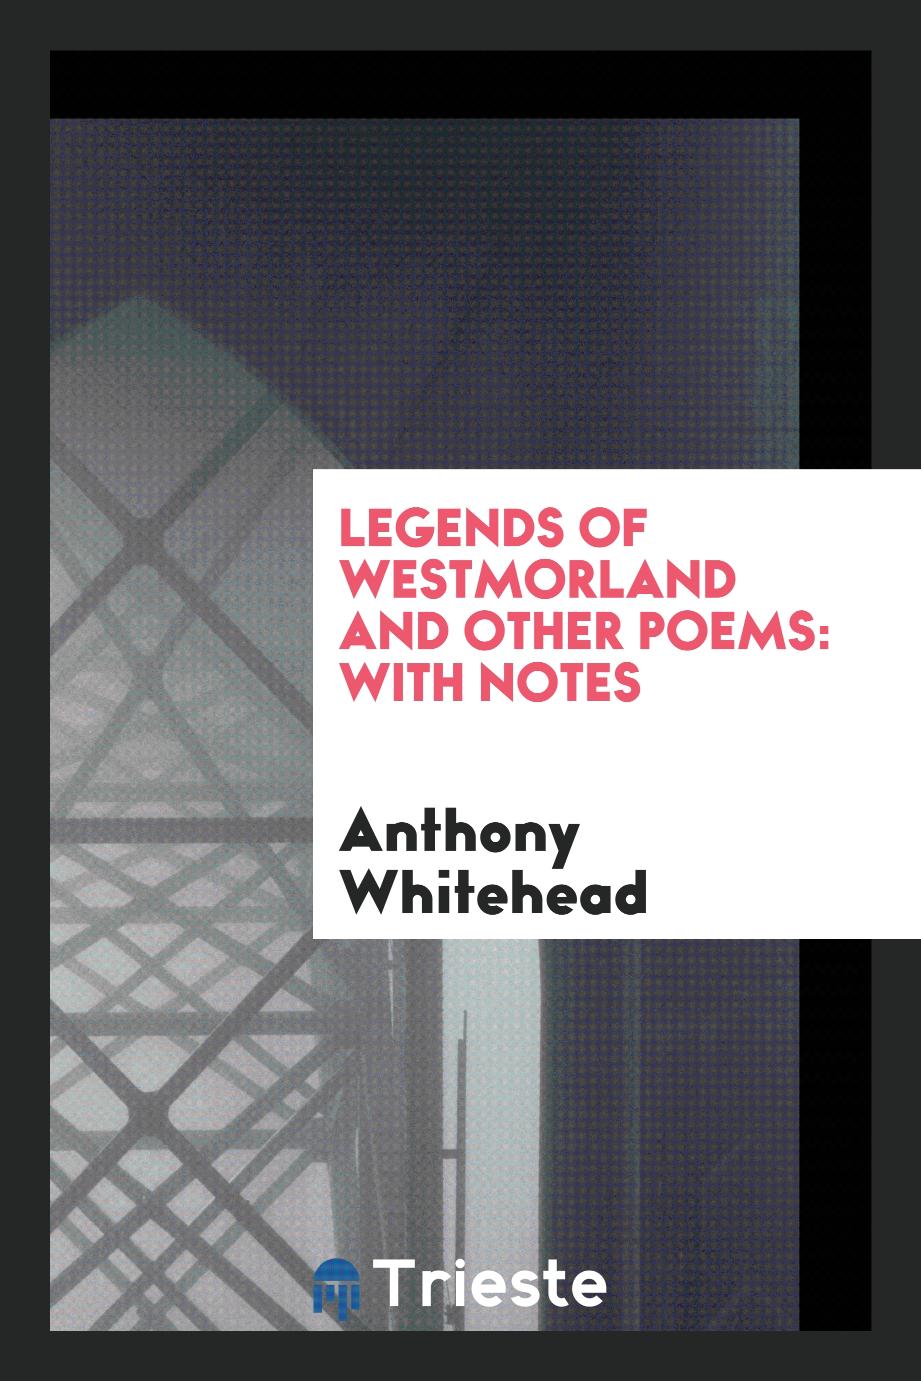 Legends of Westmorland and Other Poems: With Notes